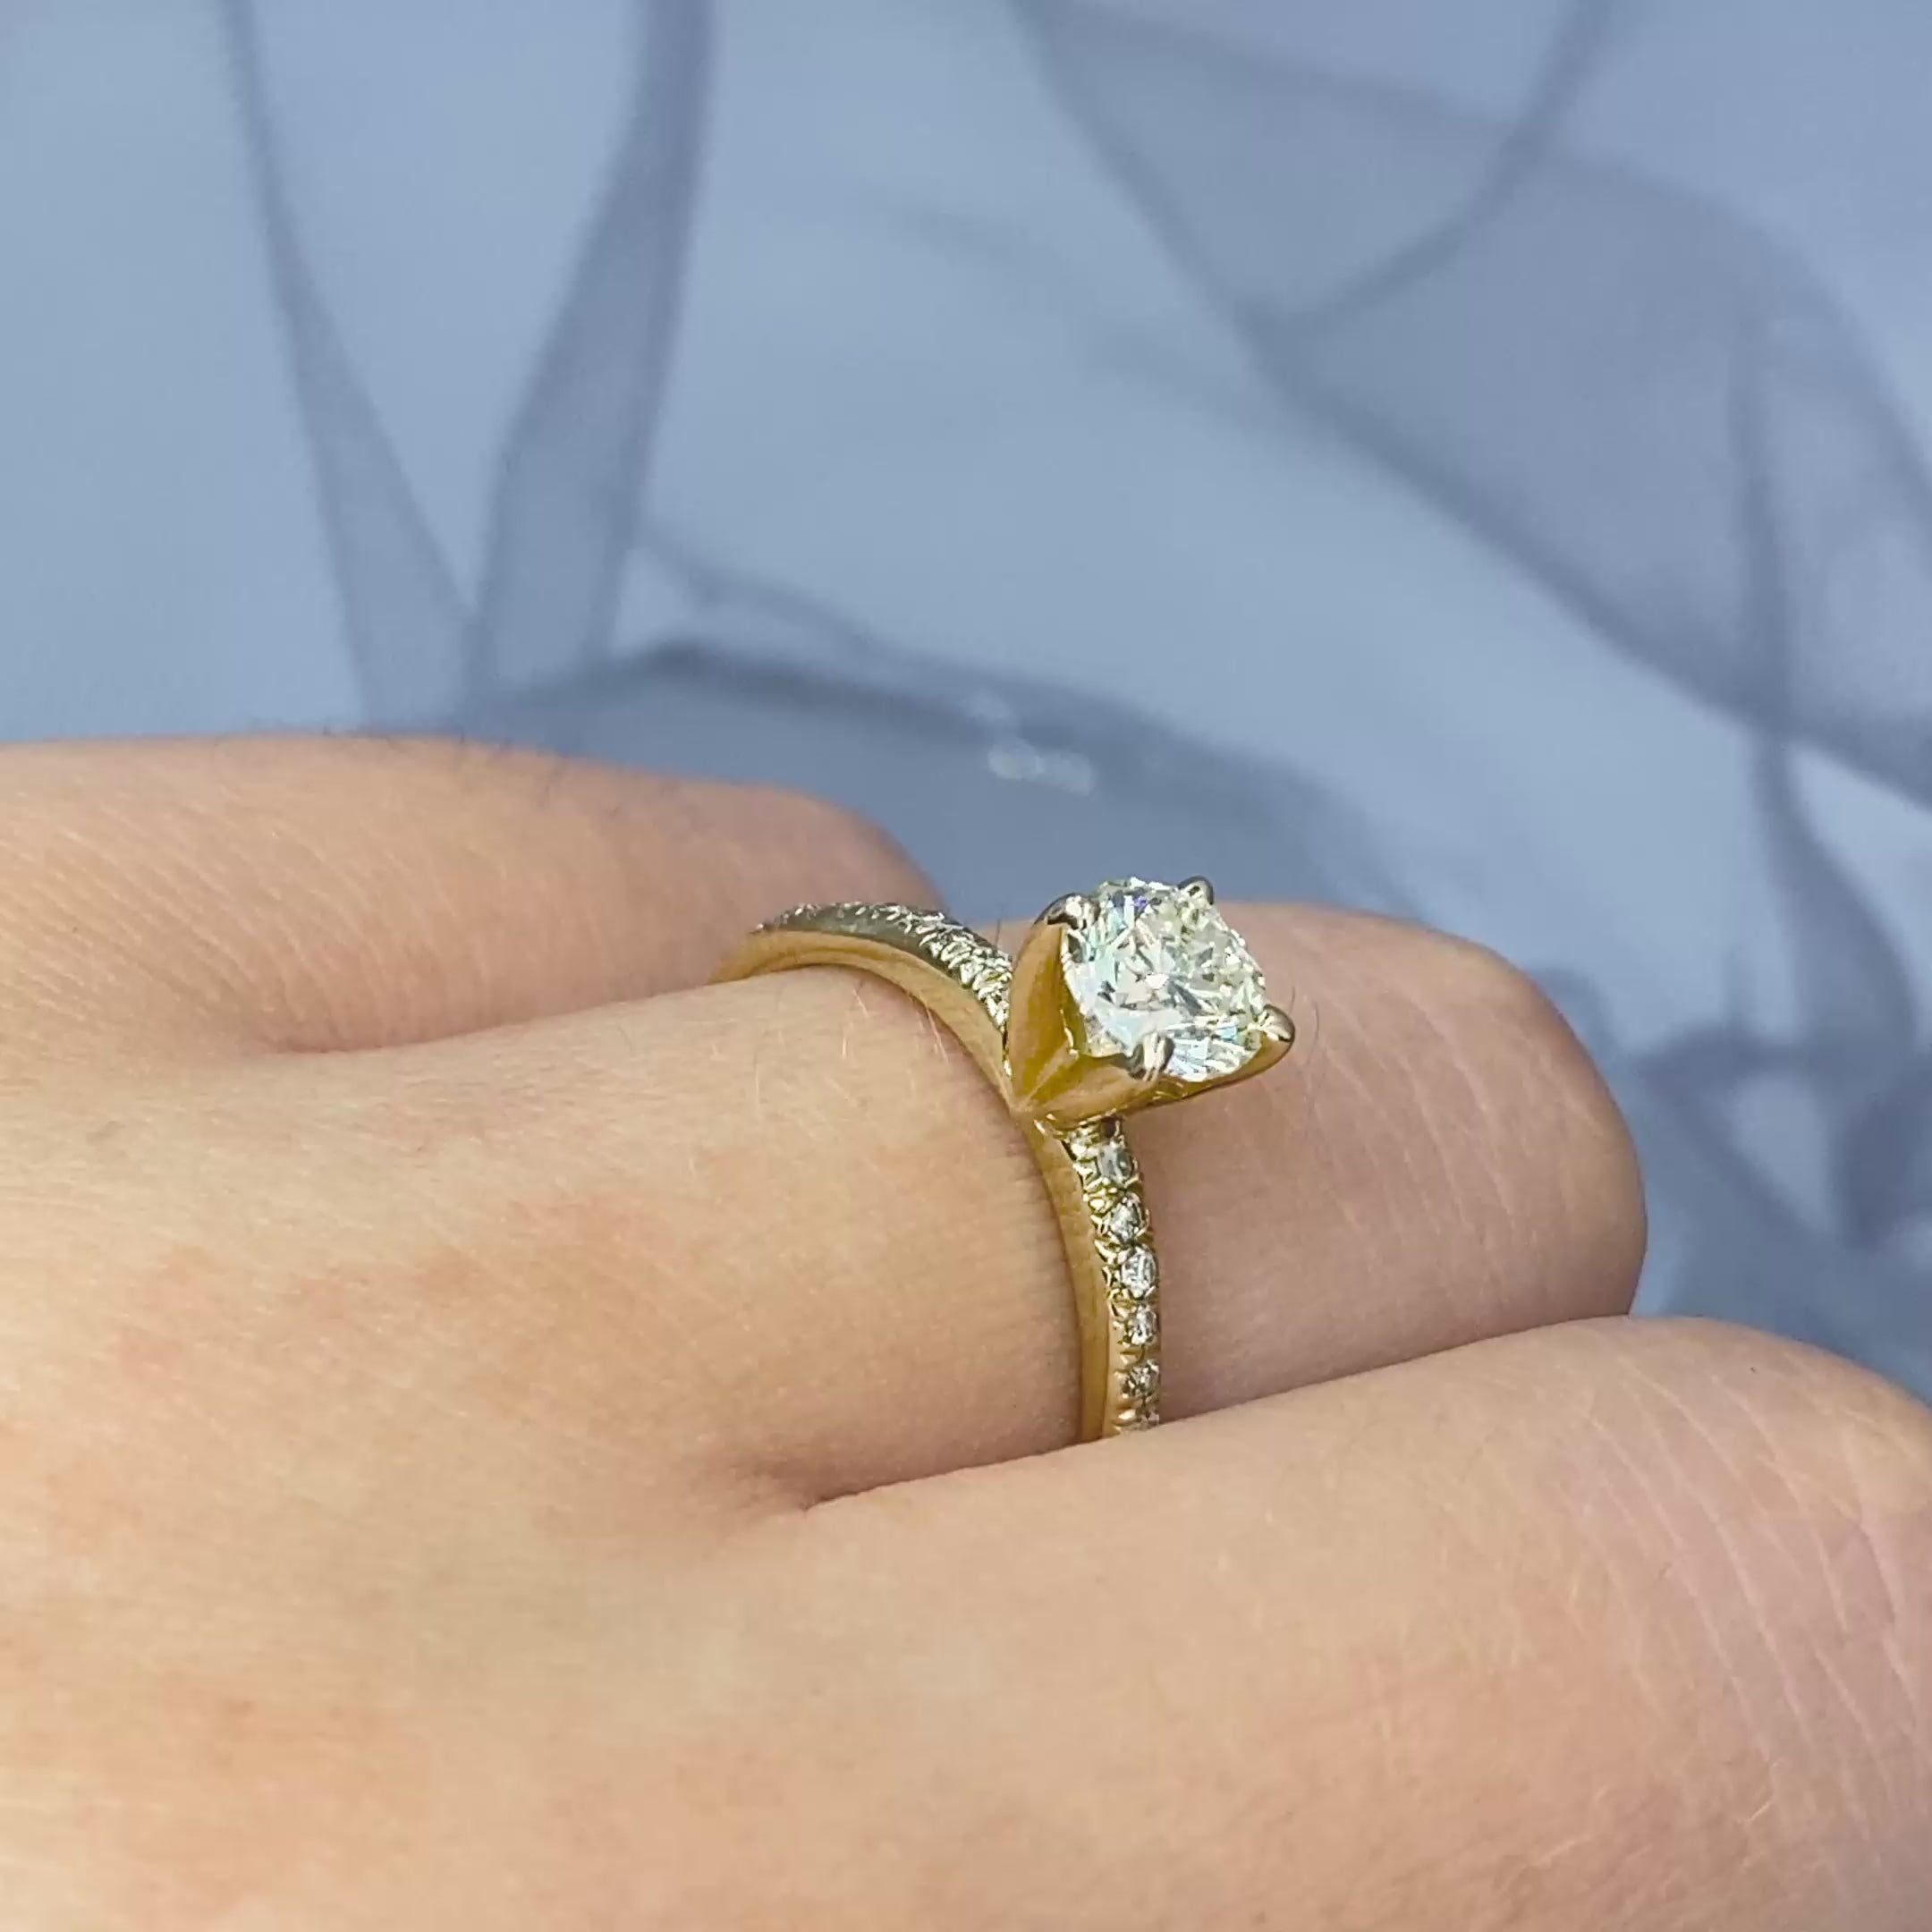 Special 1.00 CT Round Cut Diamond Engagement Ring in 14KT Yellow Gold